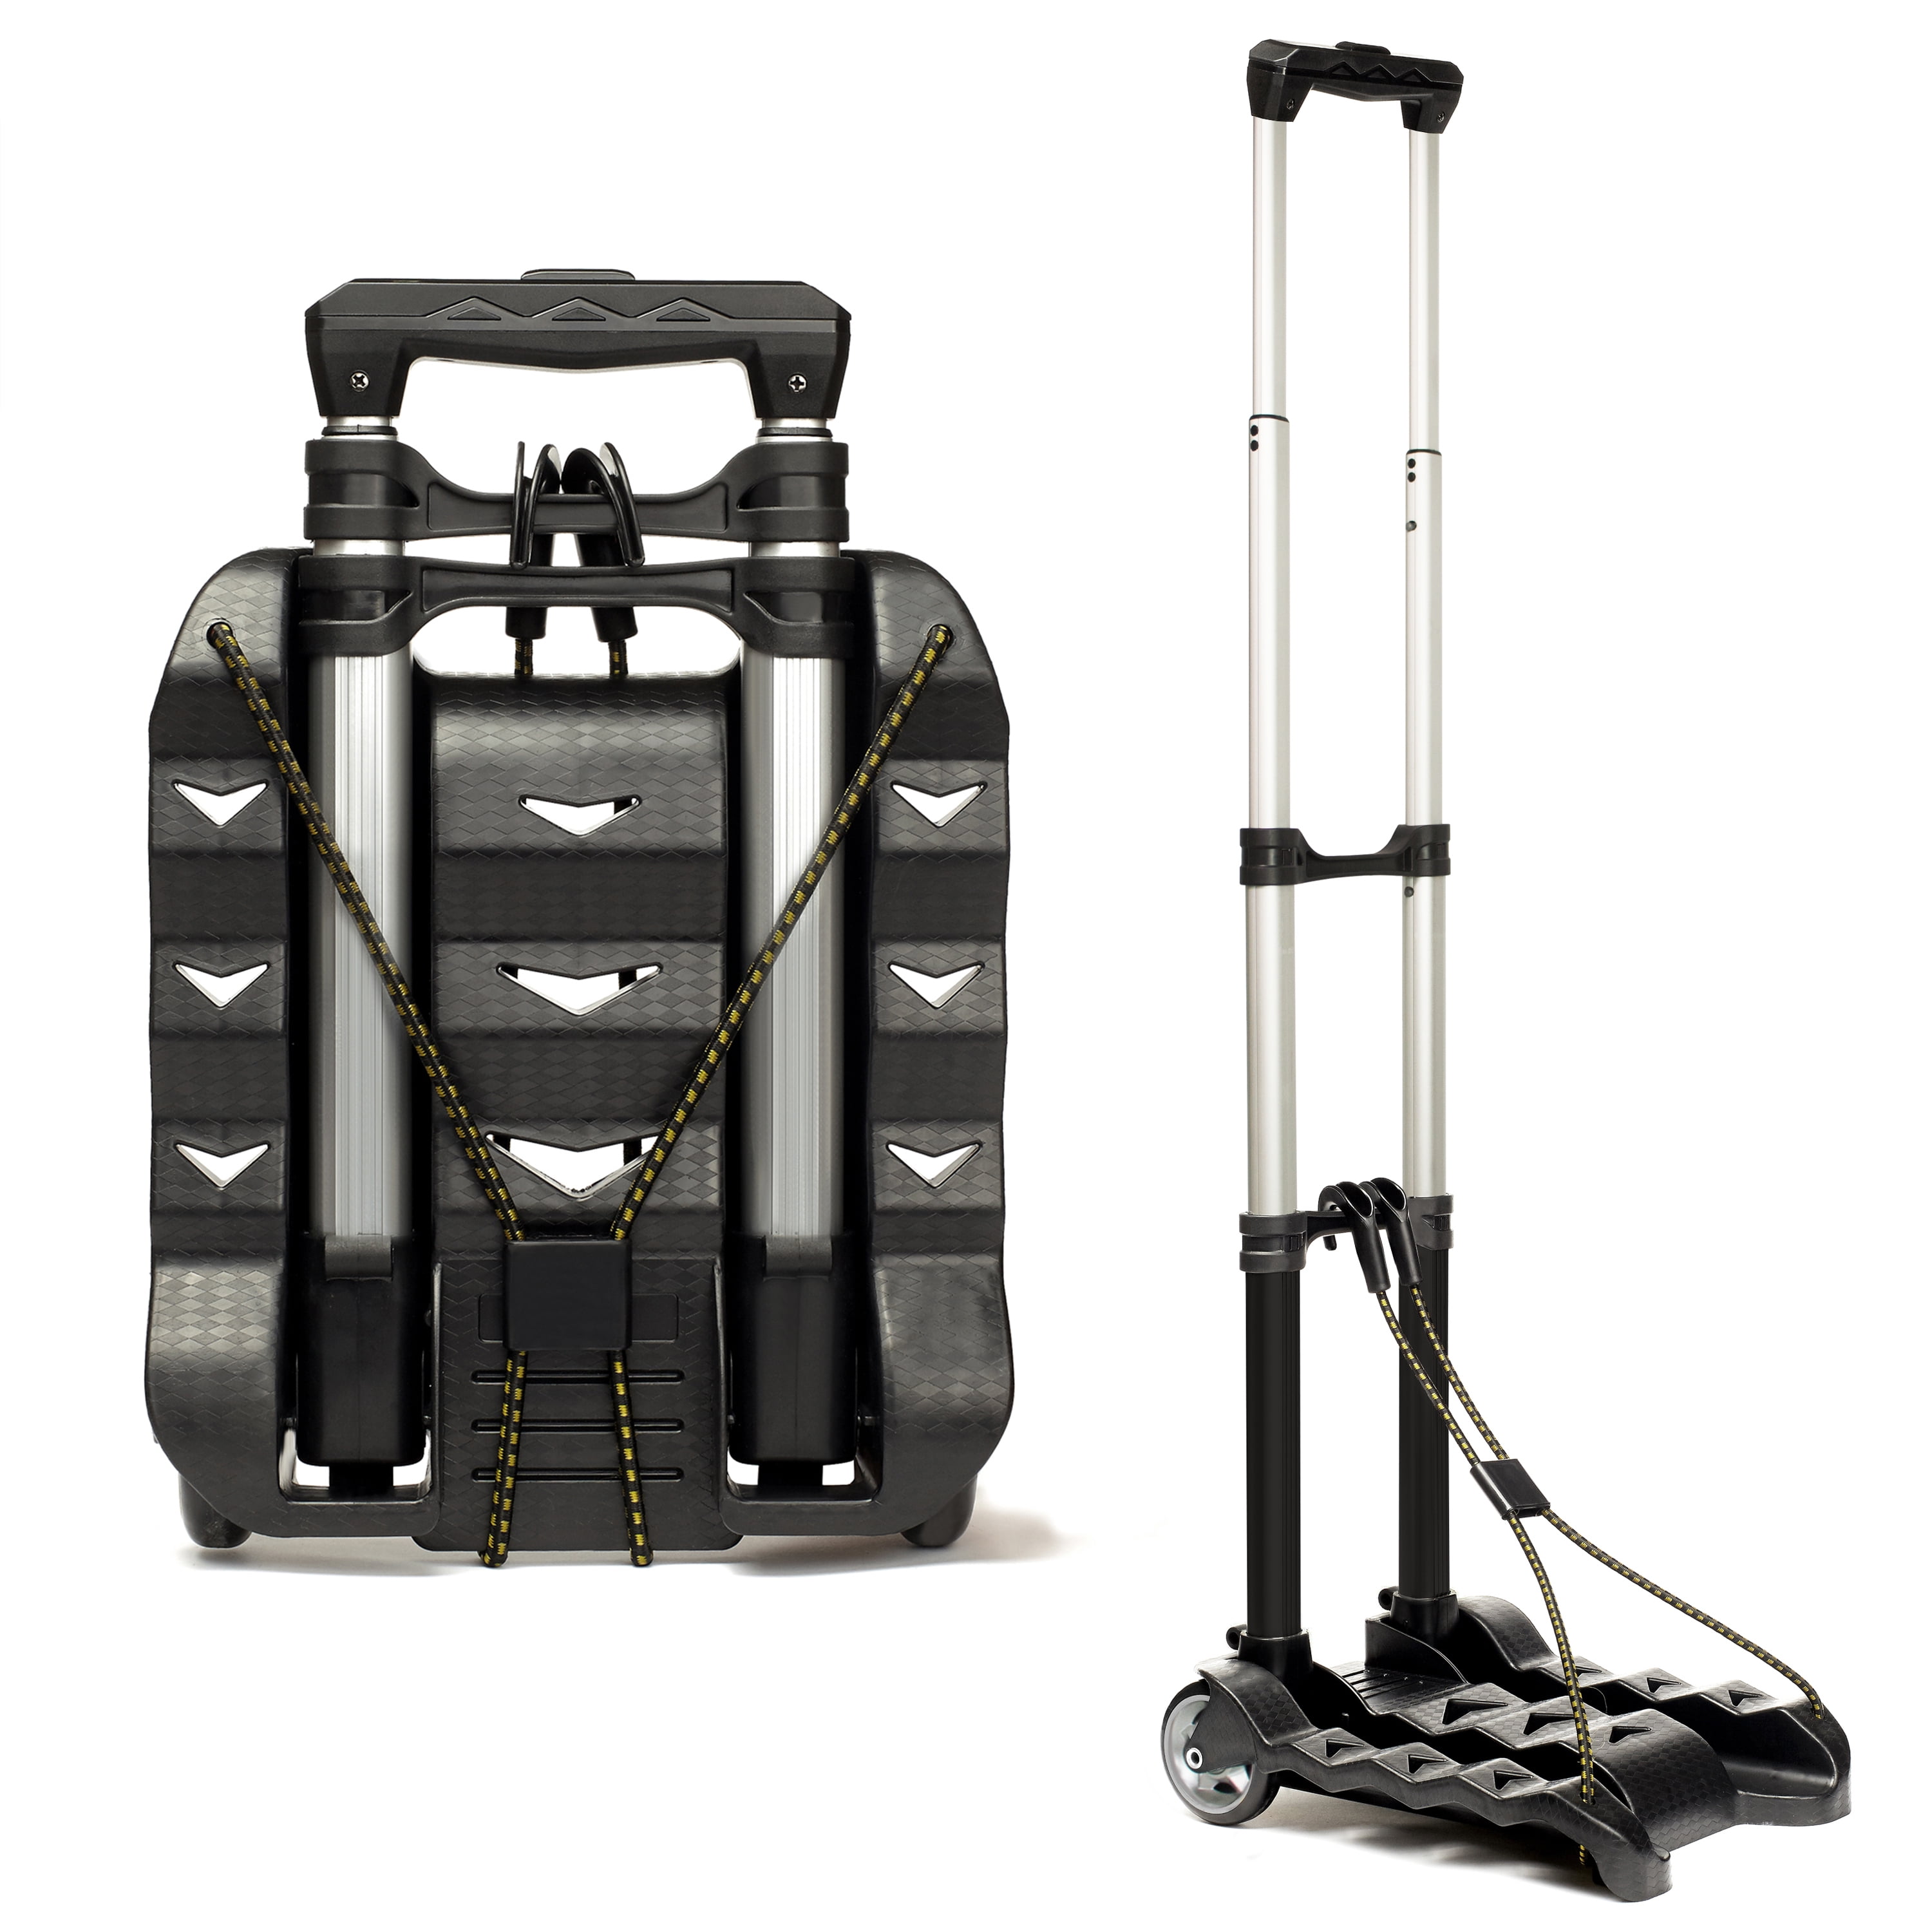 Folding Hand Truck And Dolly Portable 2 Wheels Luggage Trolley Cart With Bandage 